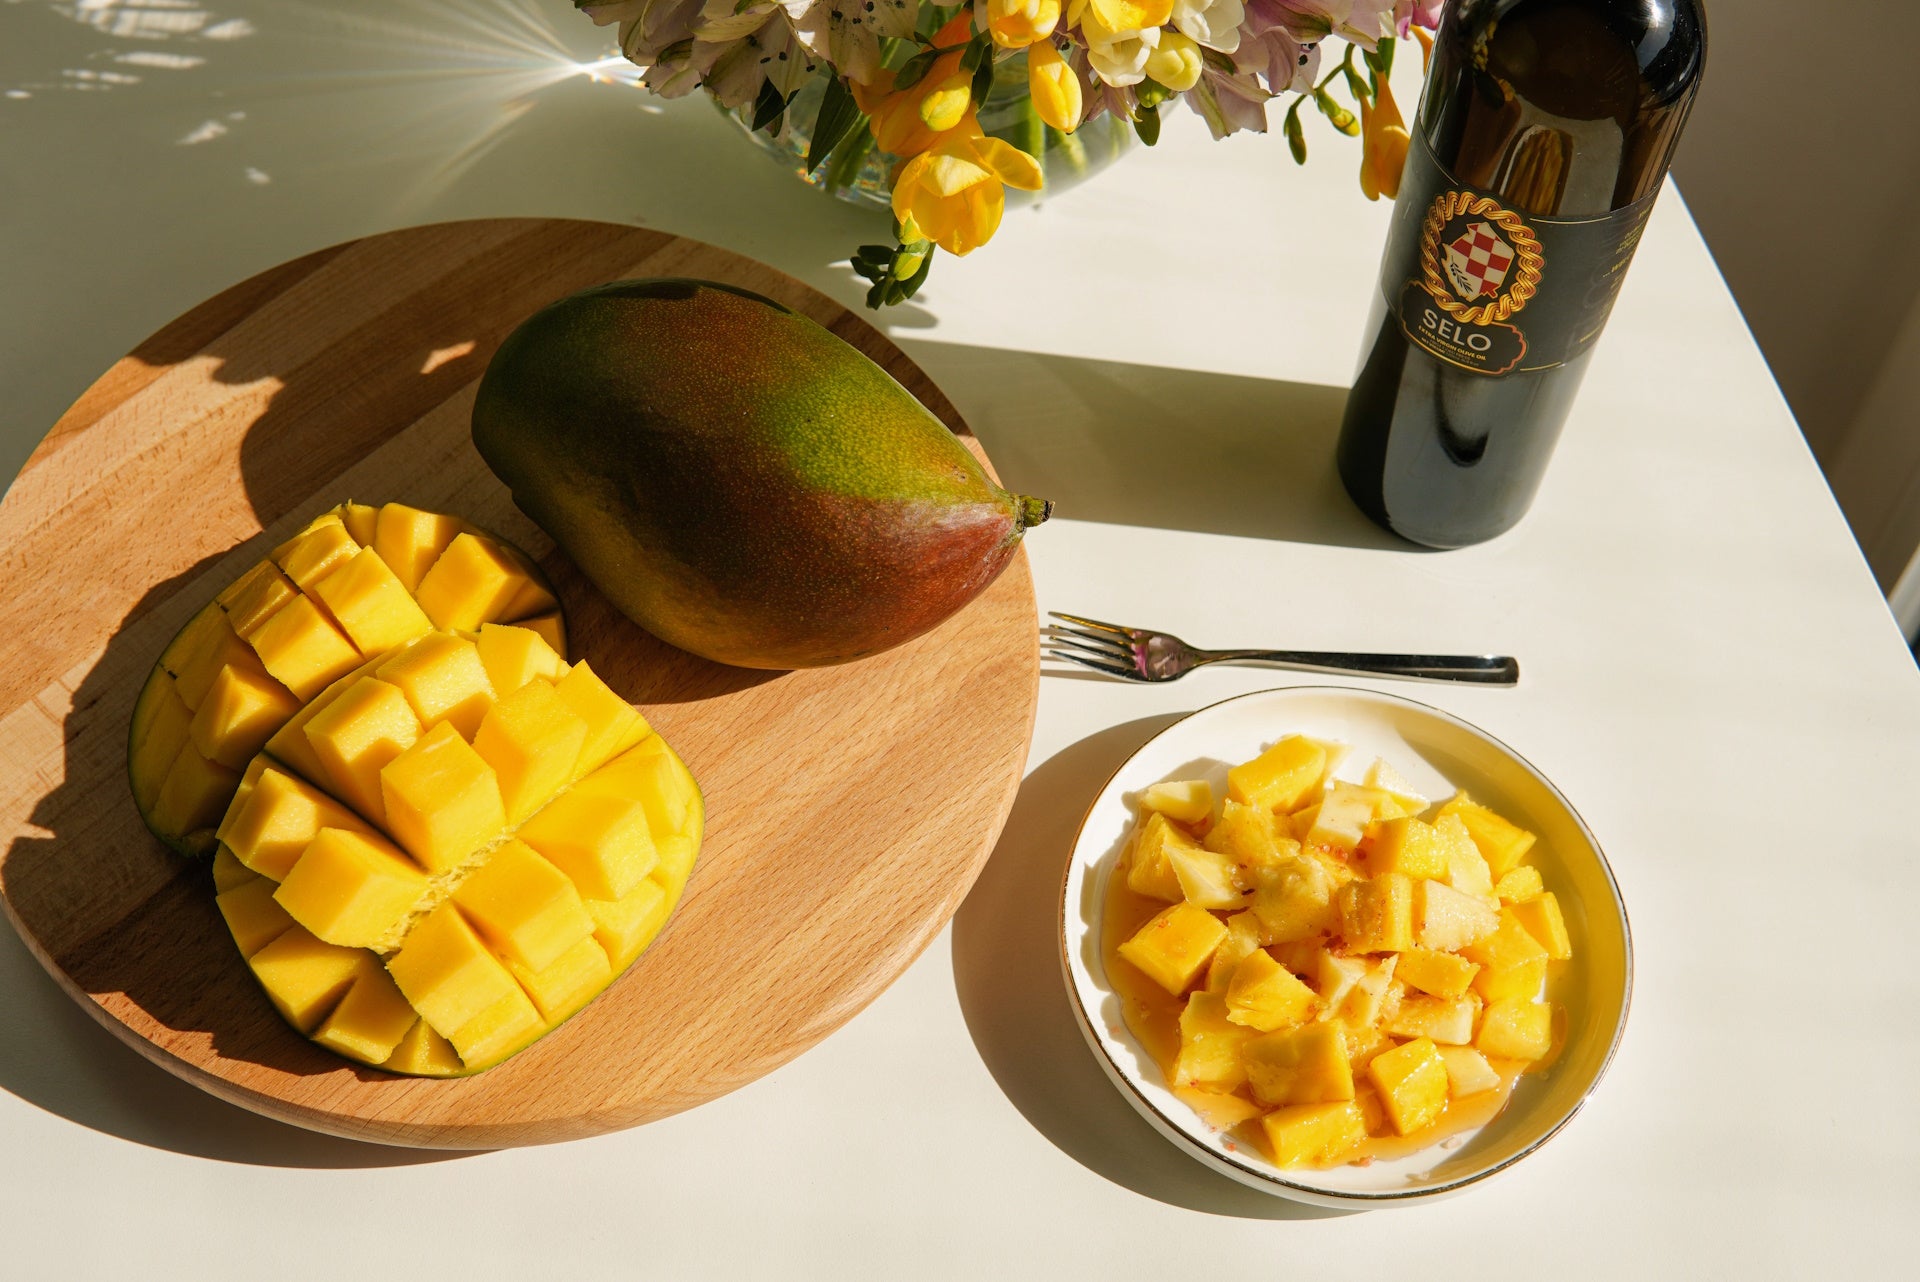 Juicy and ripe mango slices, a delightful summer treat, perfectly showcasing the vibrant colors and inviting sweetness of the fruit.